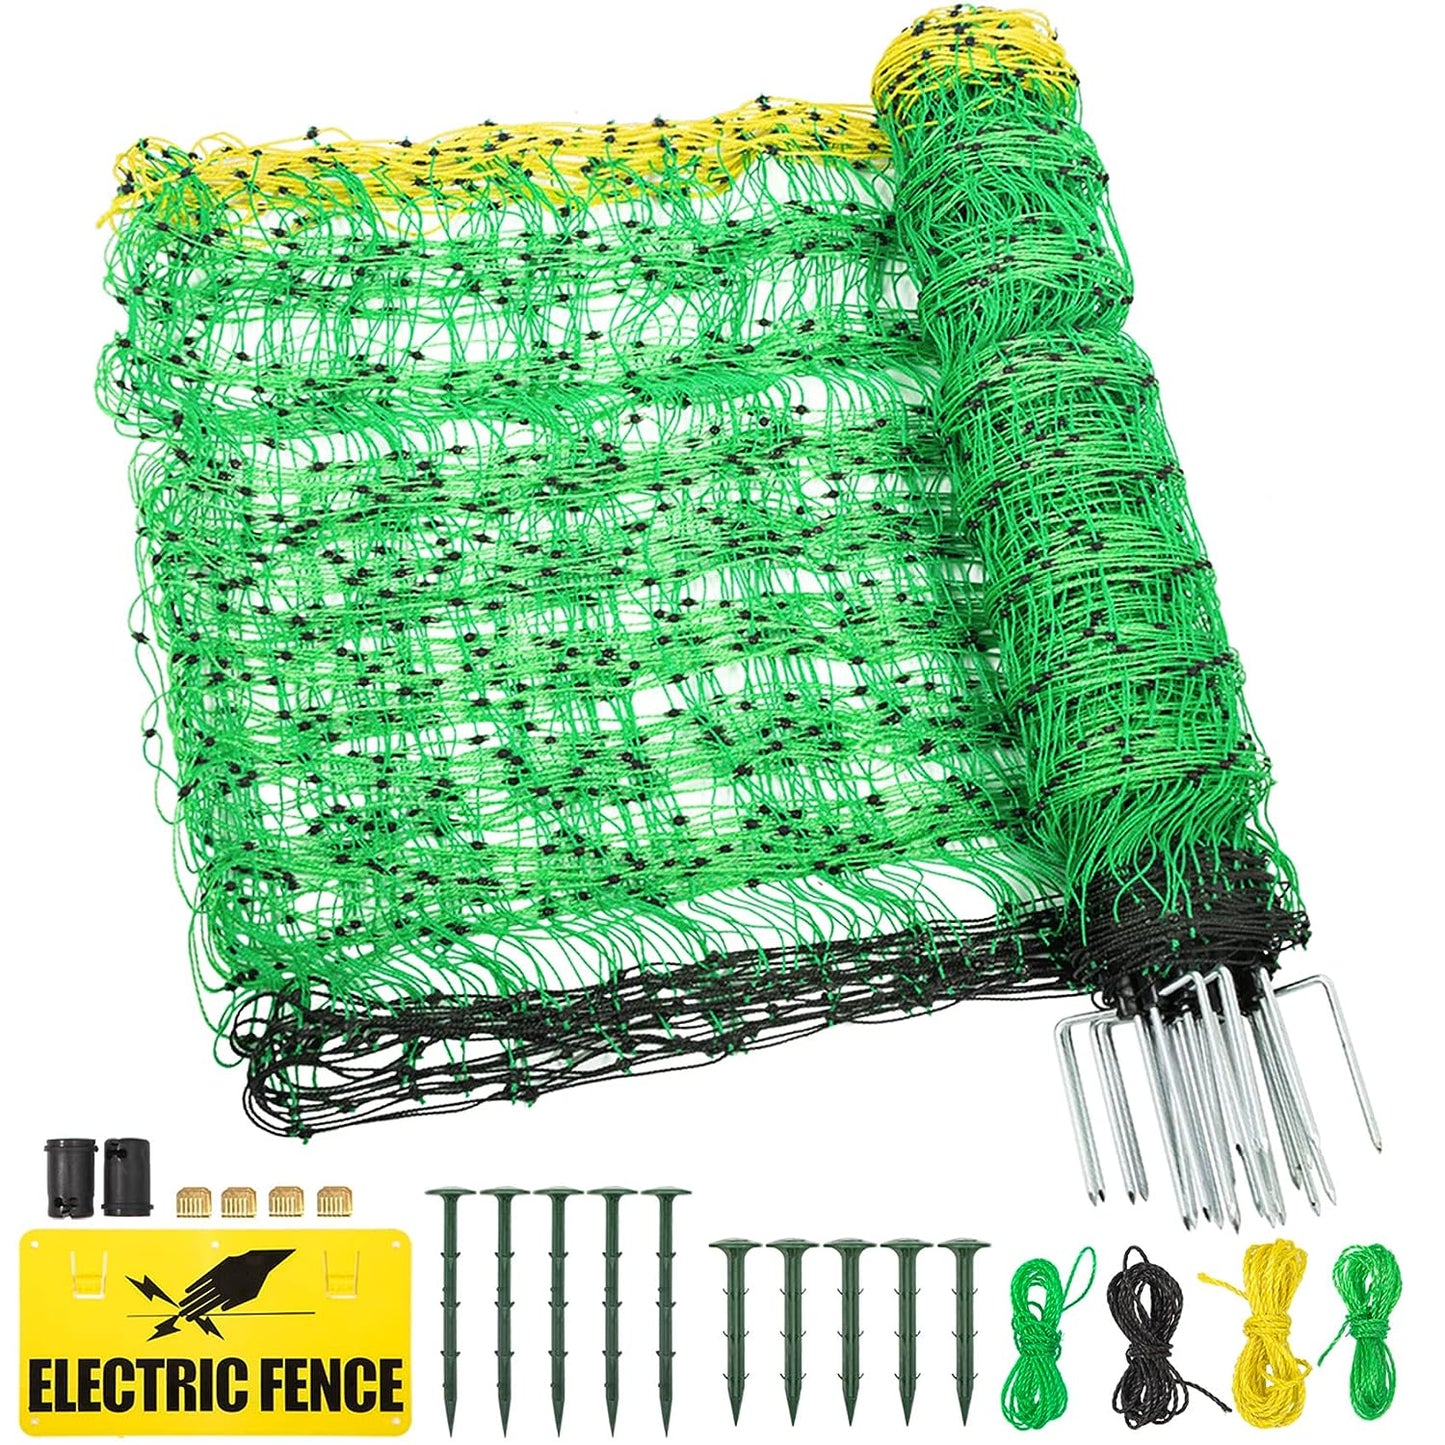 TMEE Electric Fence Netting Goat Sheep Fencing Livestock Netting Fence with 14 Posts Double Spiked, Portable Mesh for Lambs, Deer, Hogs, Dogs in Backyards, Farms and Ranches, 35.5" H x 164' L, Green